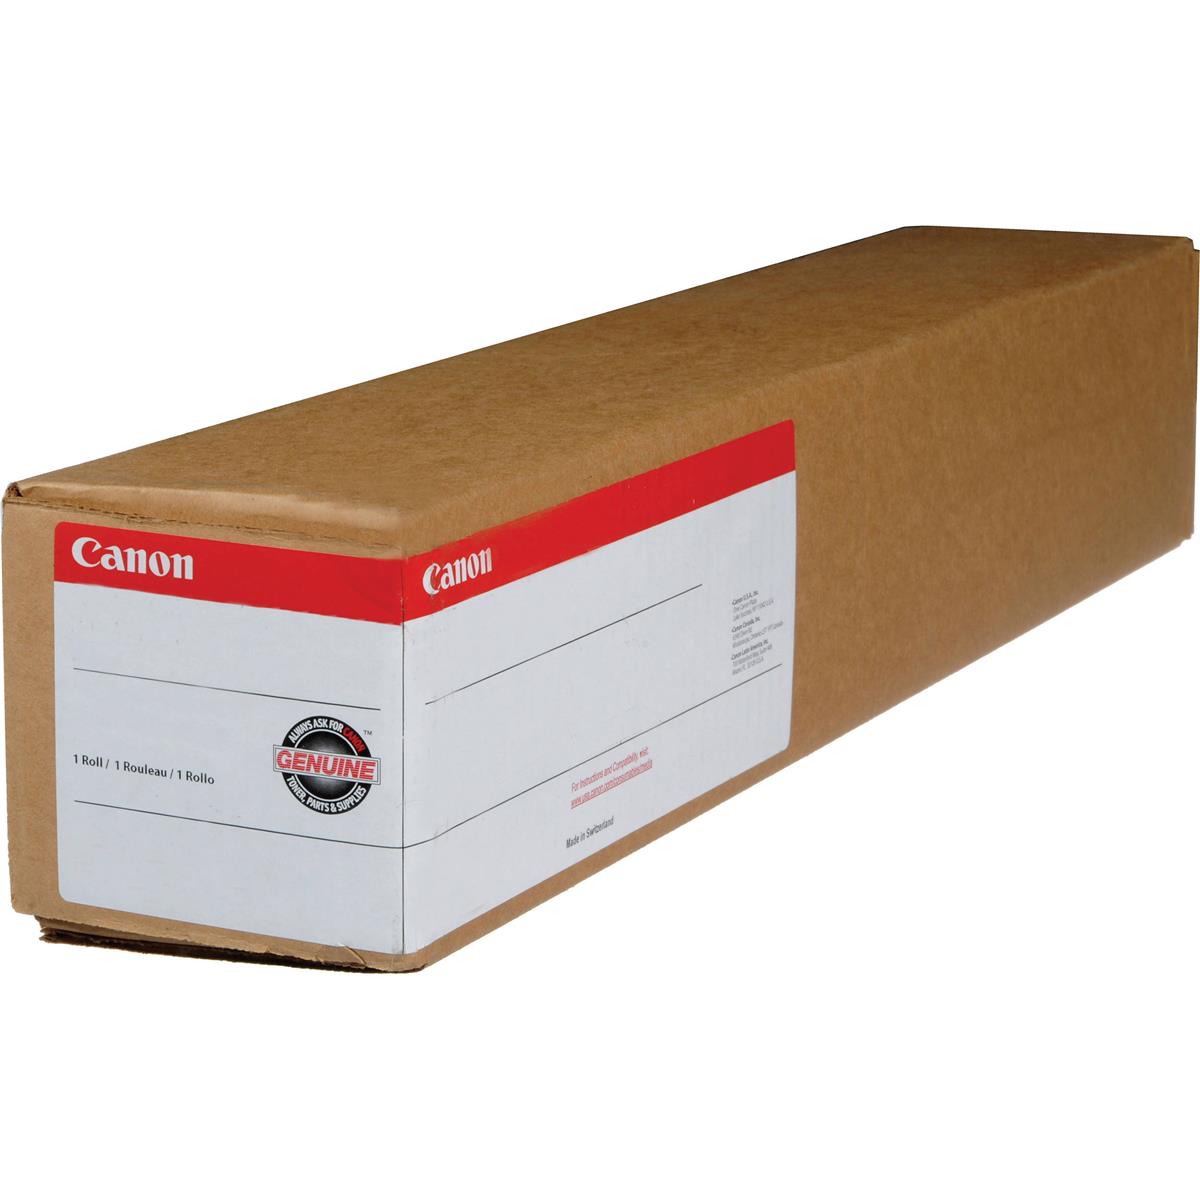 Image of Canon Water Resistant Adhesive Matte Vinyl